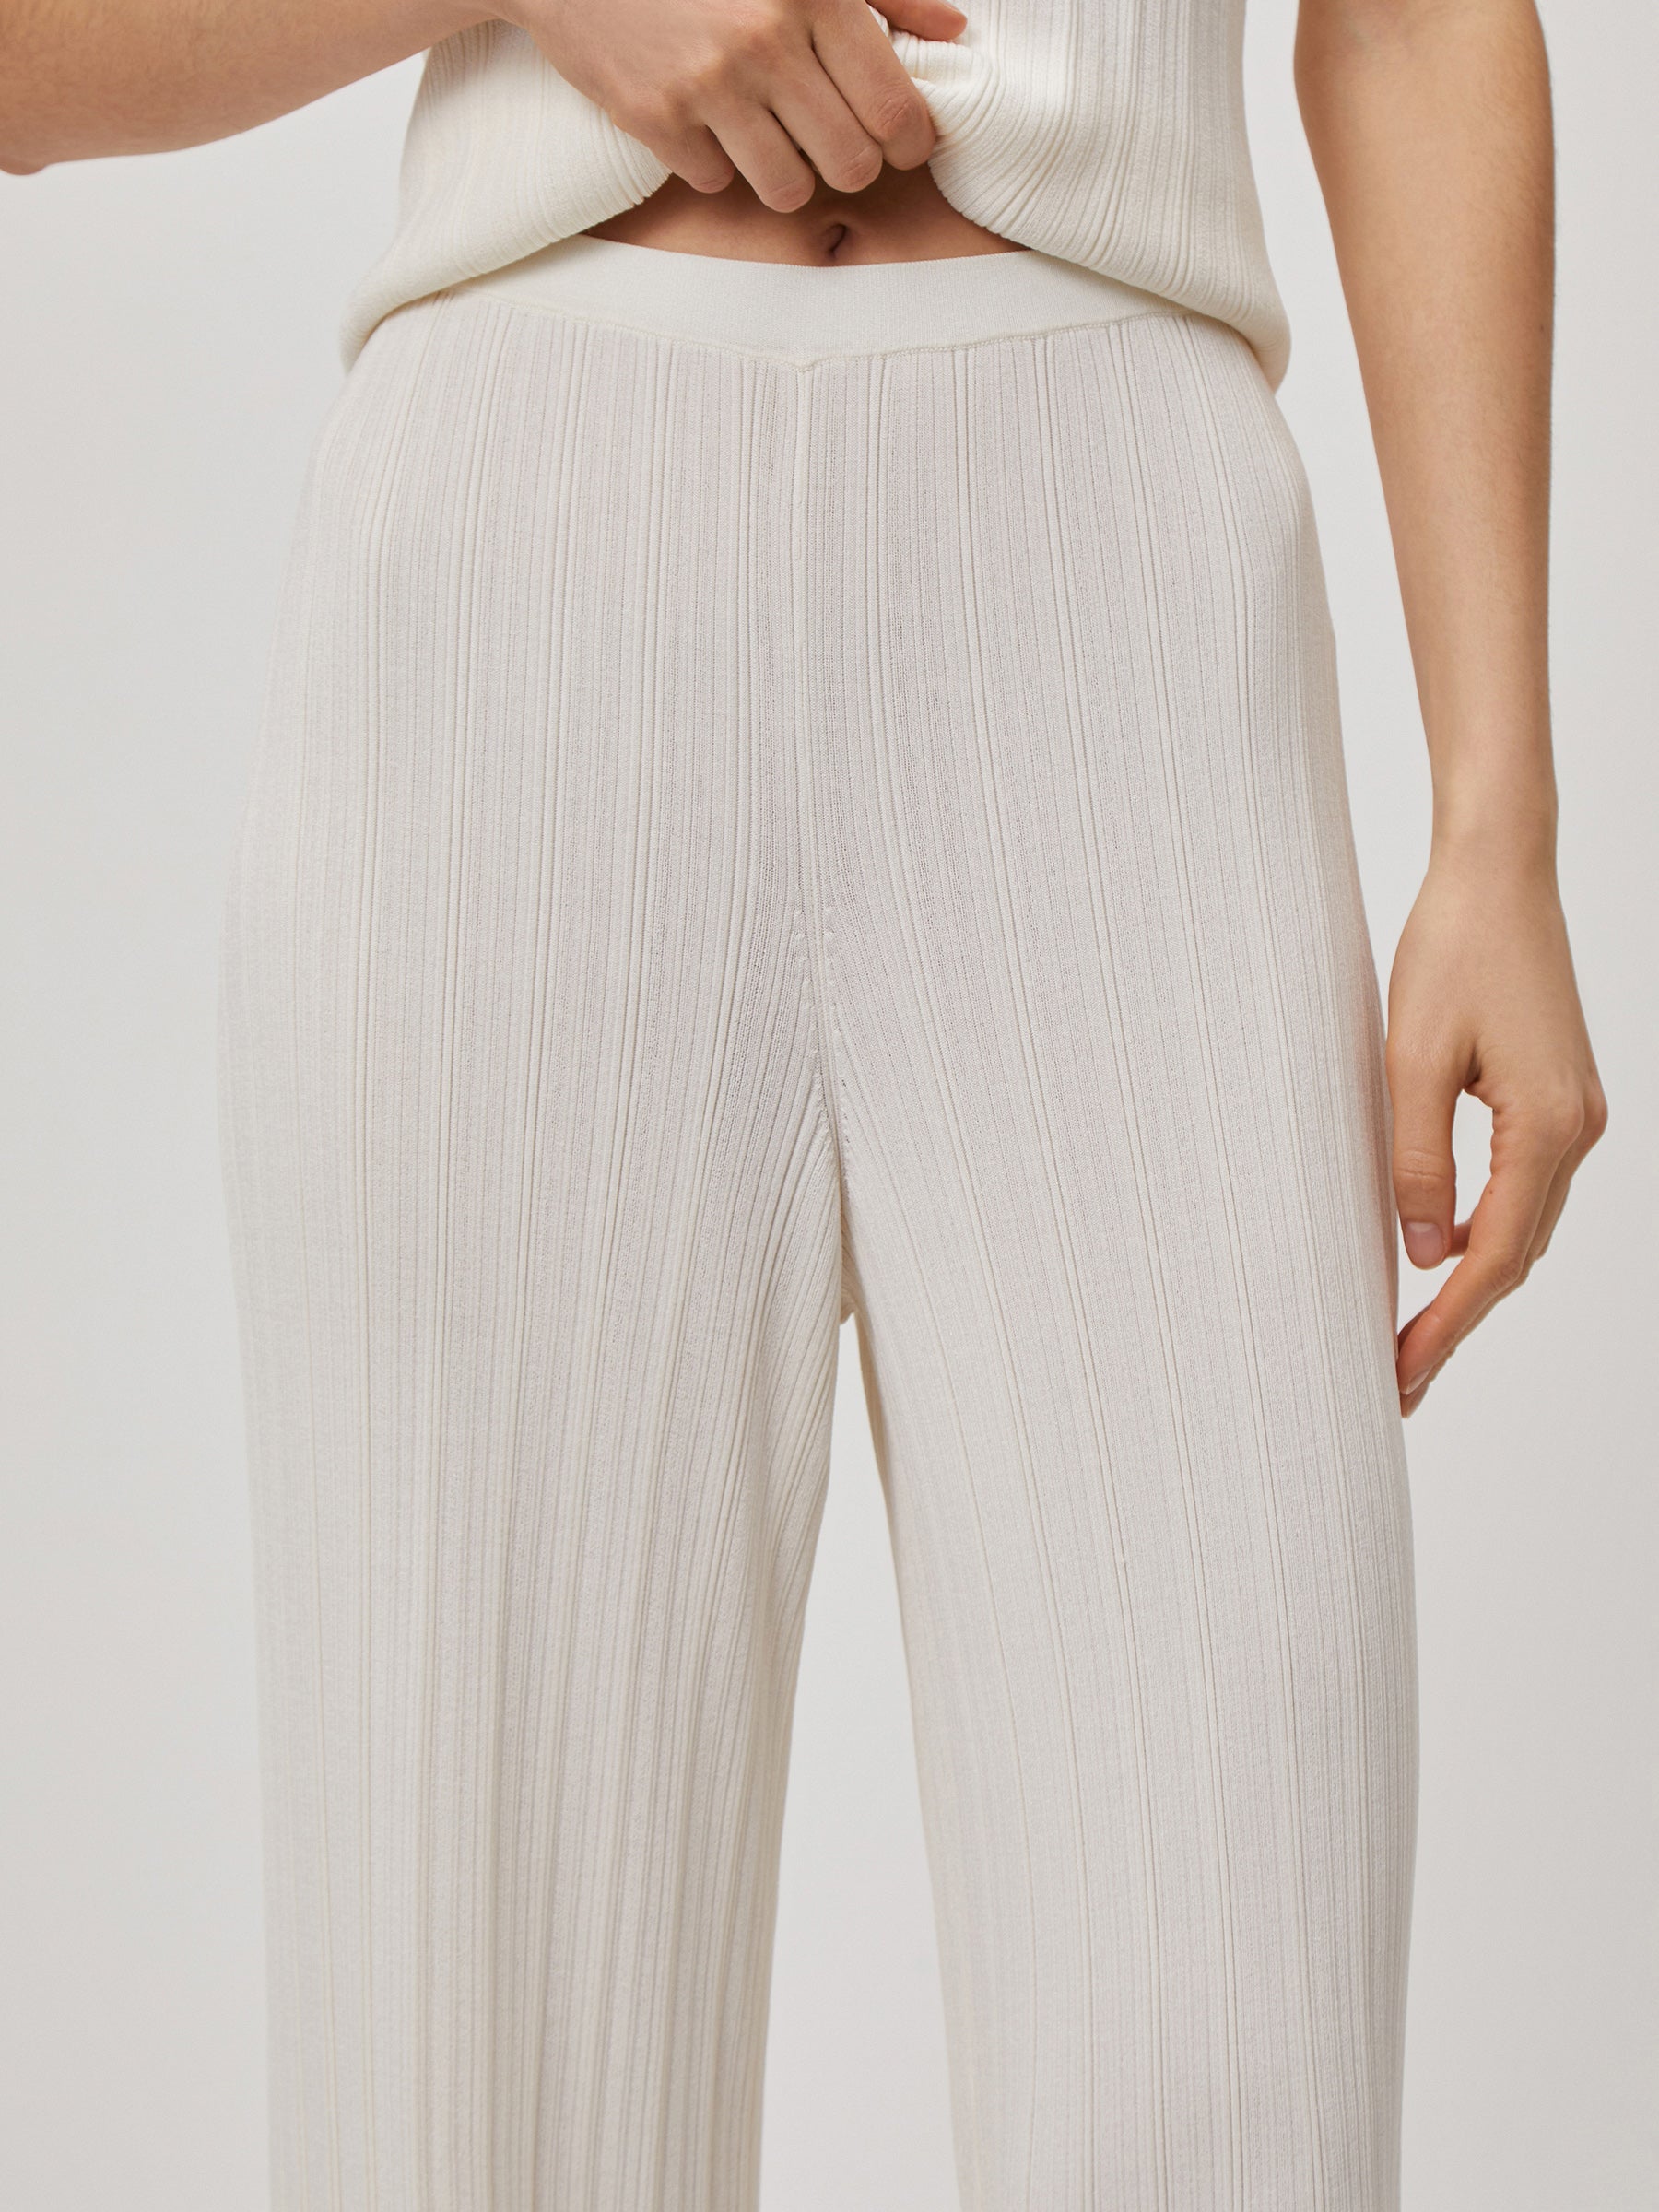 New Look ribbed wide leg lounge pant in cream